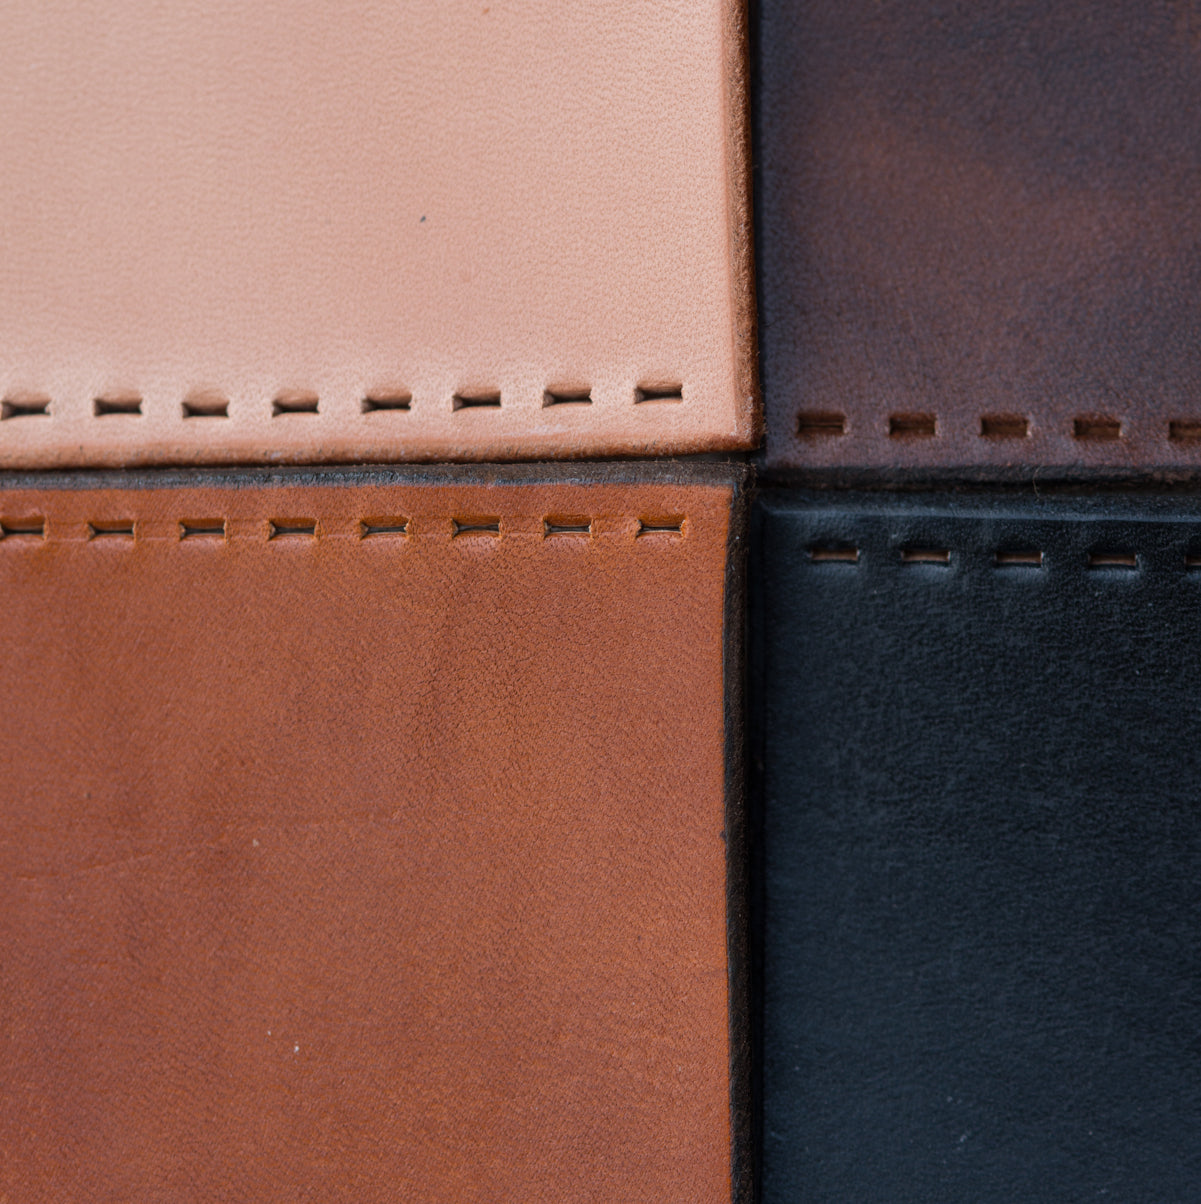 A close-up photo of Walnut Studiolo's leather, with four city grips in each of our four leather colors coming to meet in the center of the photo: Honey, Dark Brown, Black and Natural (Light Tan). Photography credit to Erin Berzel. 